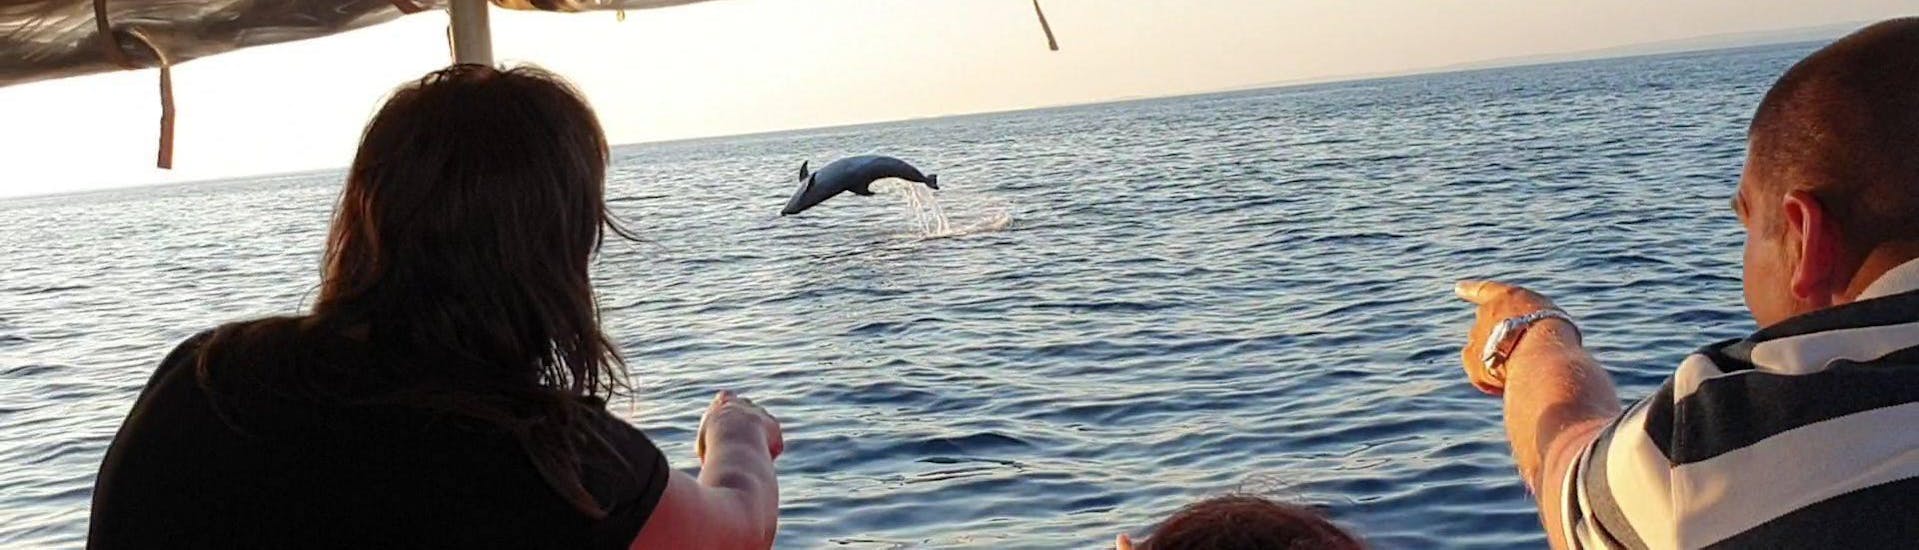 Sunset Boat Trip from Pula to Brijuni with Dolphin Searching with Pula Boat Excursions - Hero image